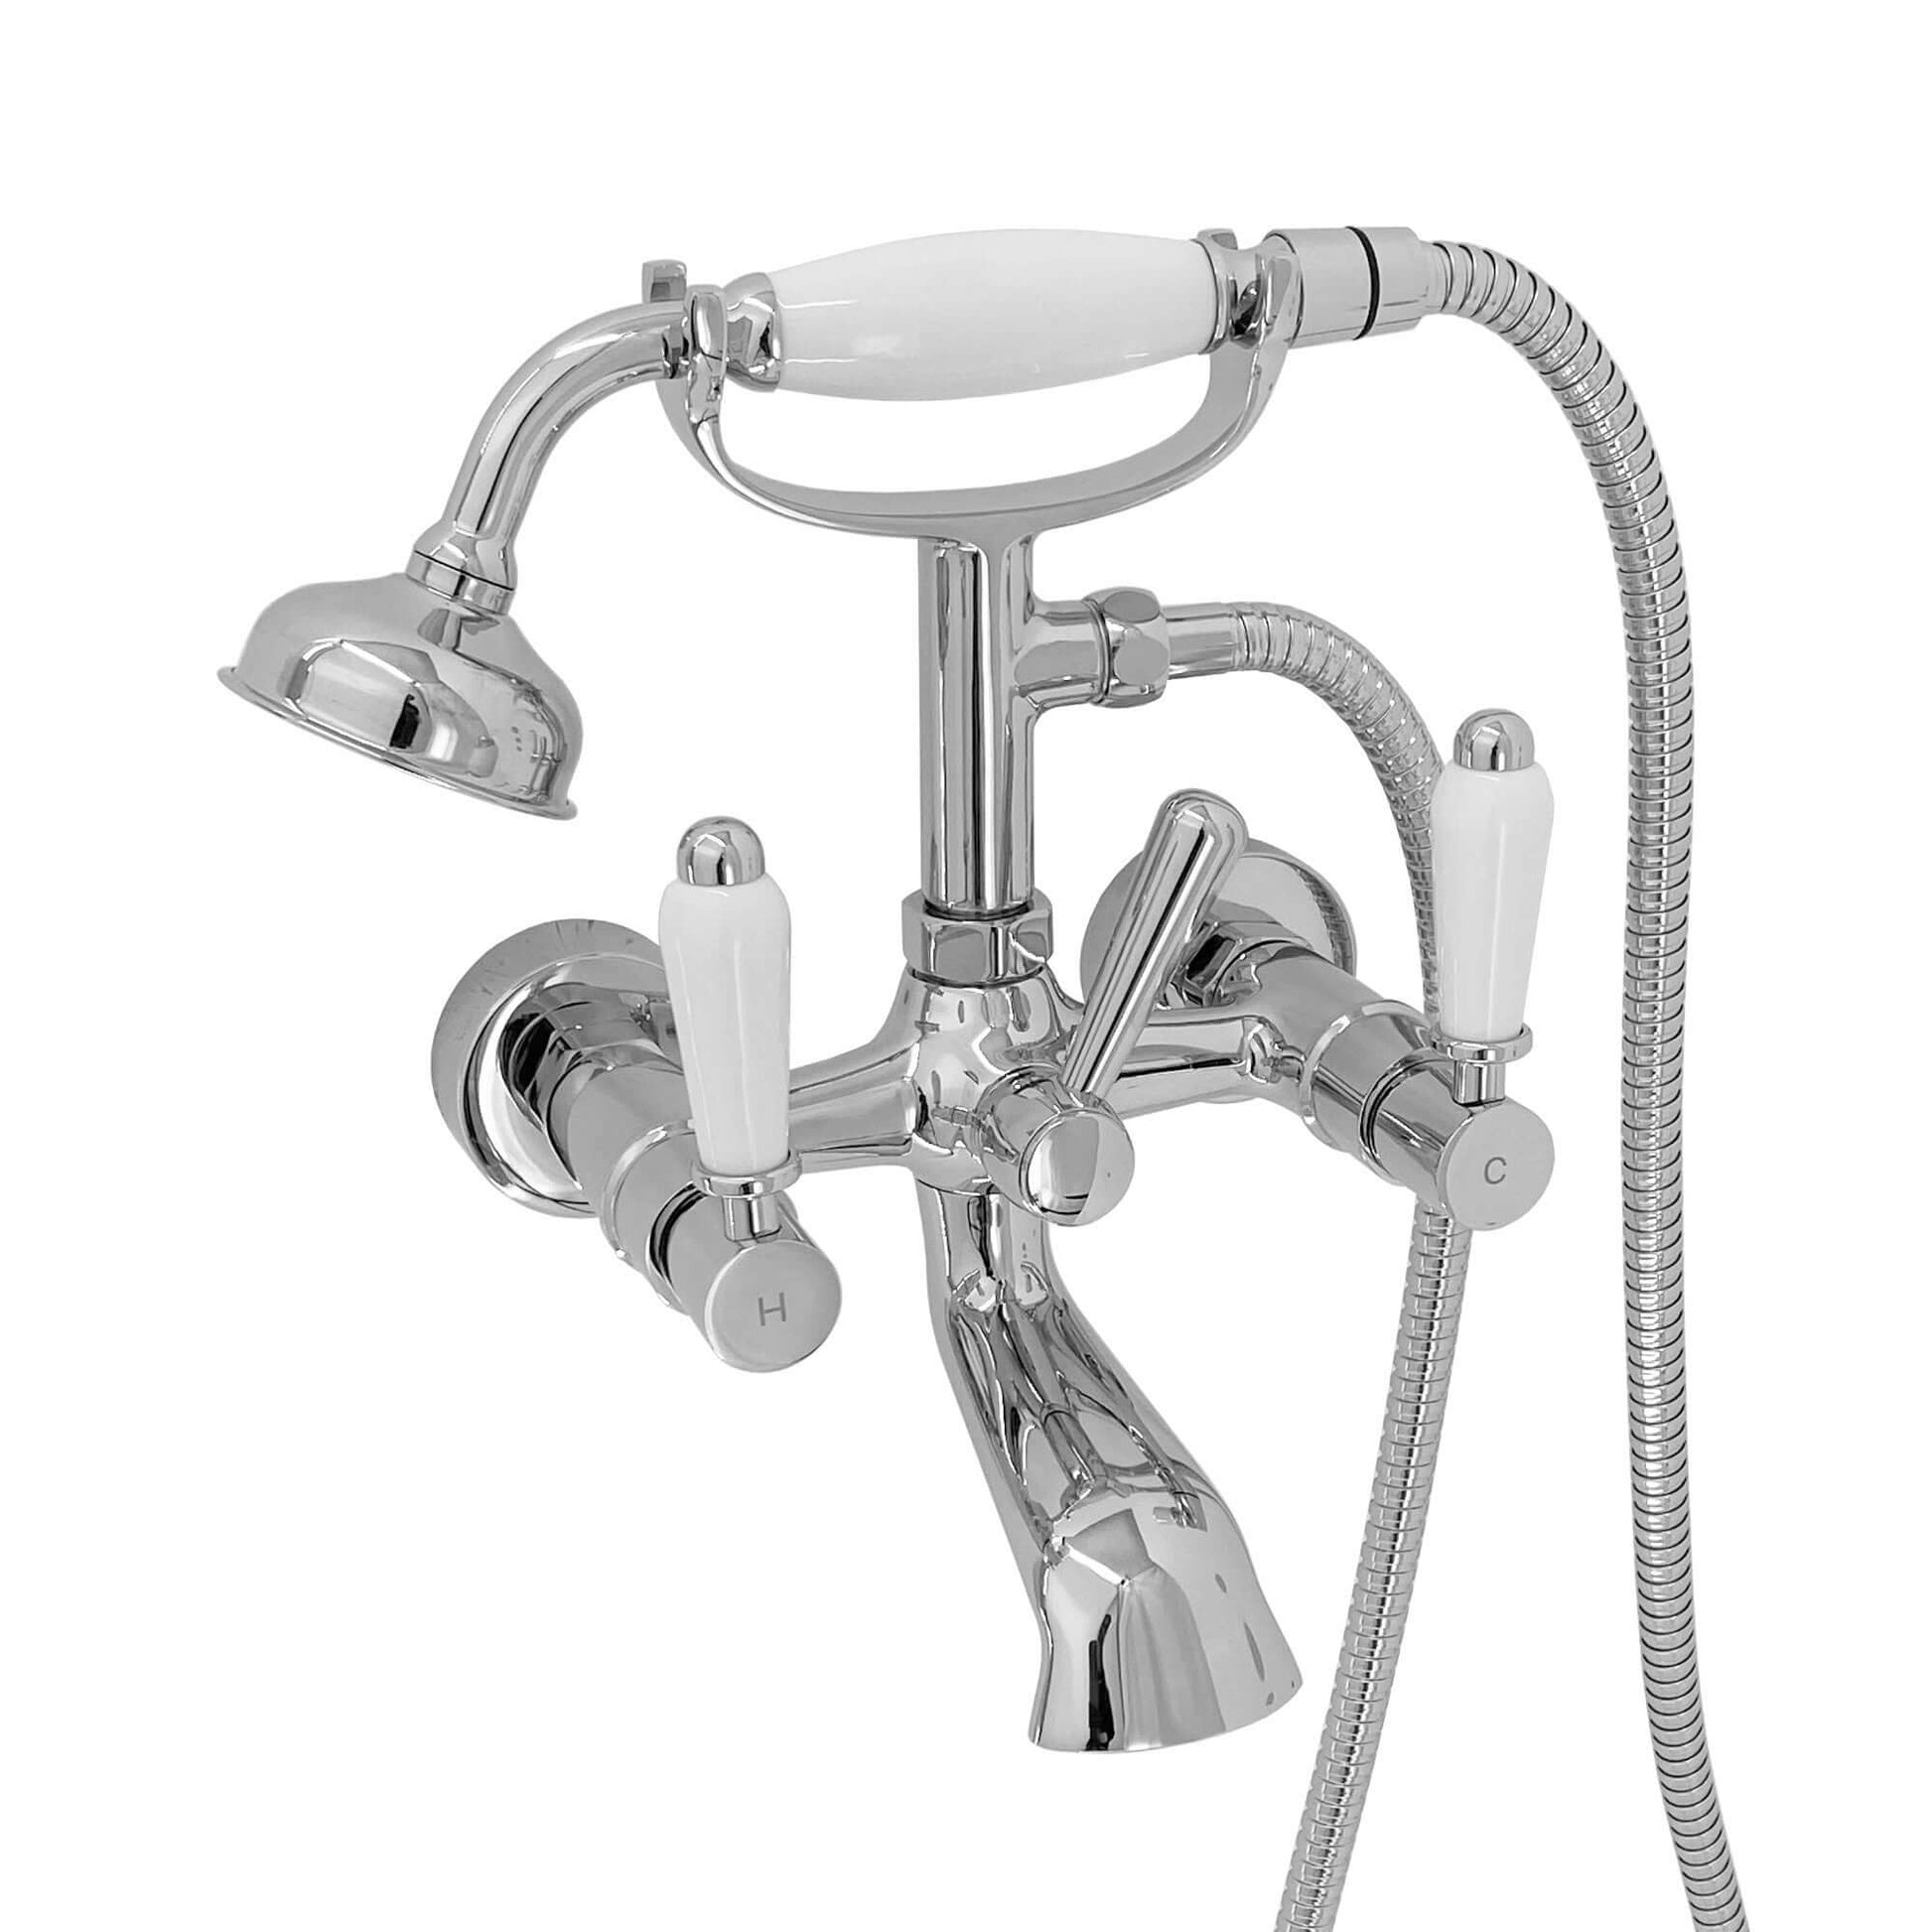 Downton wall mounted bath shower mixer tap with white ceramic levers - chrome - Taps